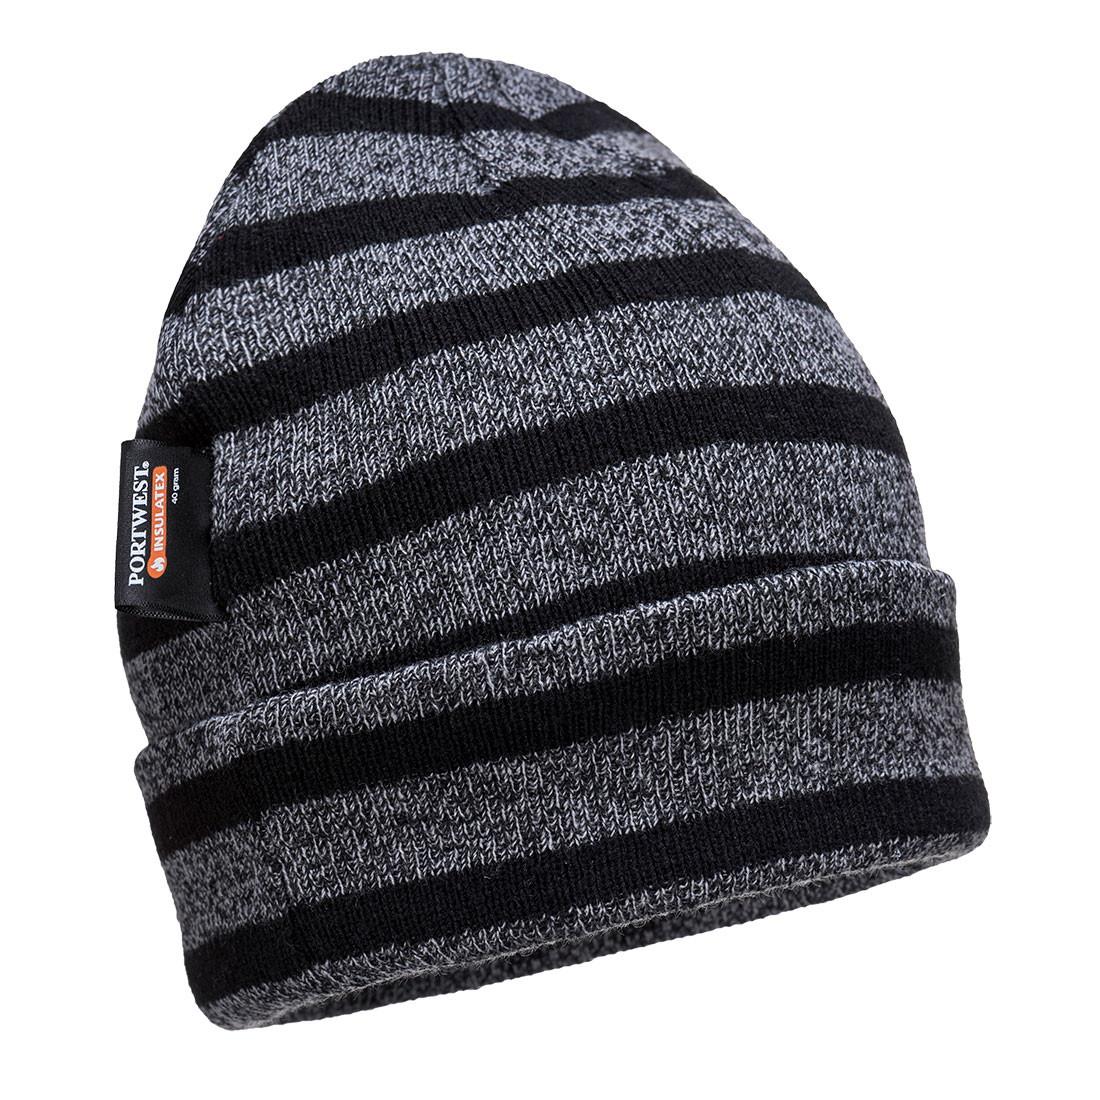 Portwest B024 Insulate Knit Cap/Hat; Insulatex Lined; Grey/Black (GR/BK); One Size